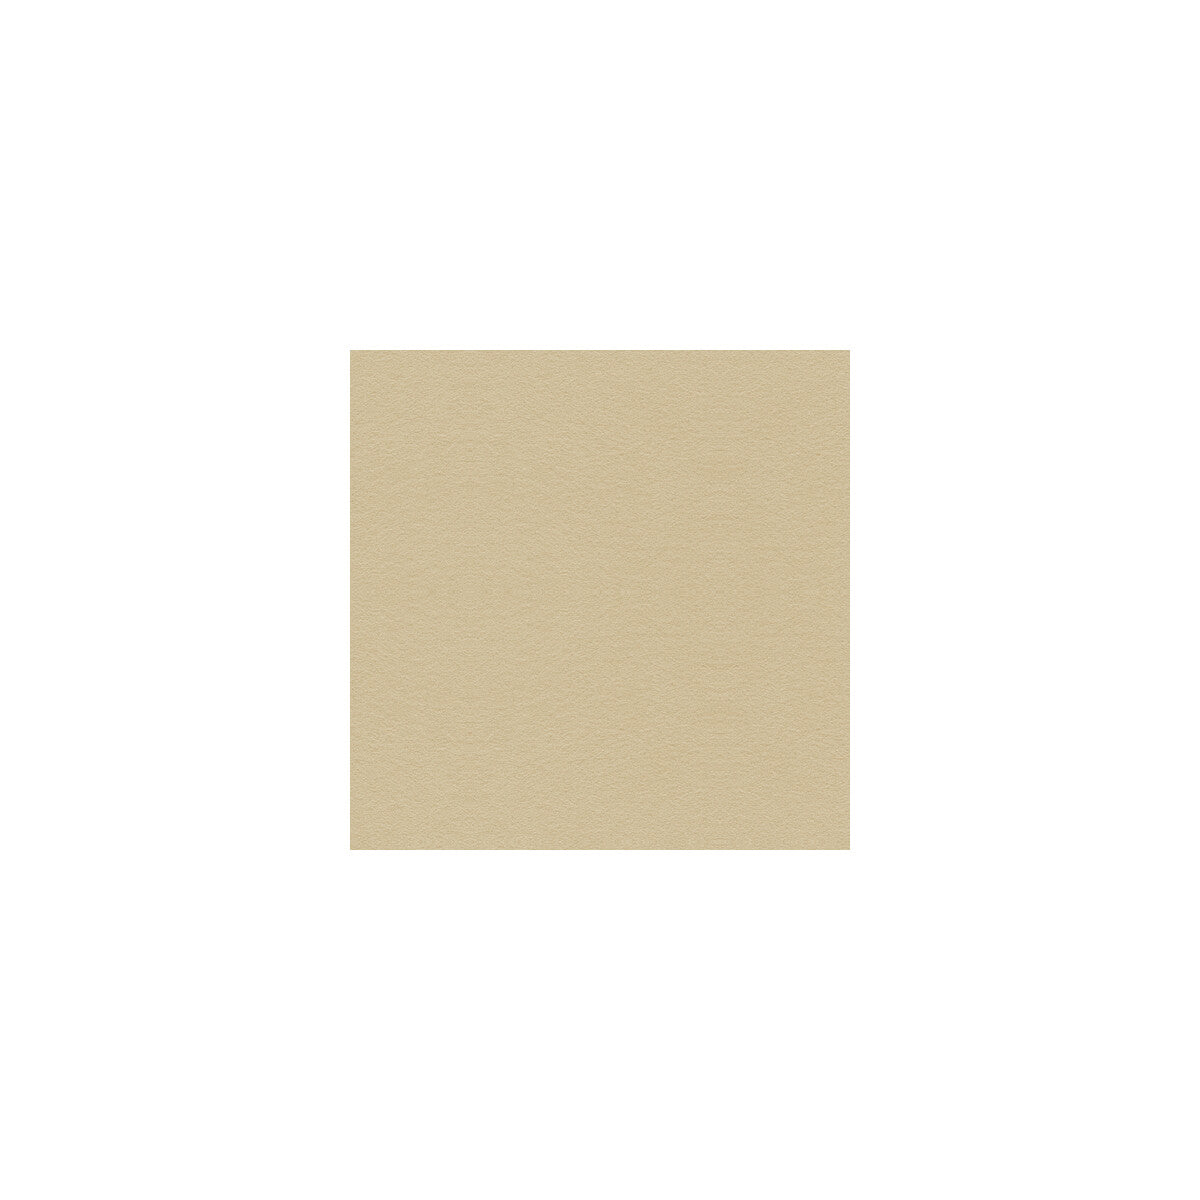 Ultimate fabric in bisque color - pattern 960122.100.0 - by Lee Jofa in the Ultimate Suede collection